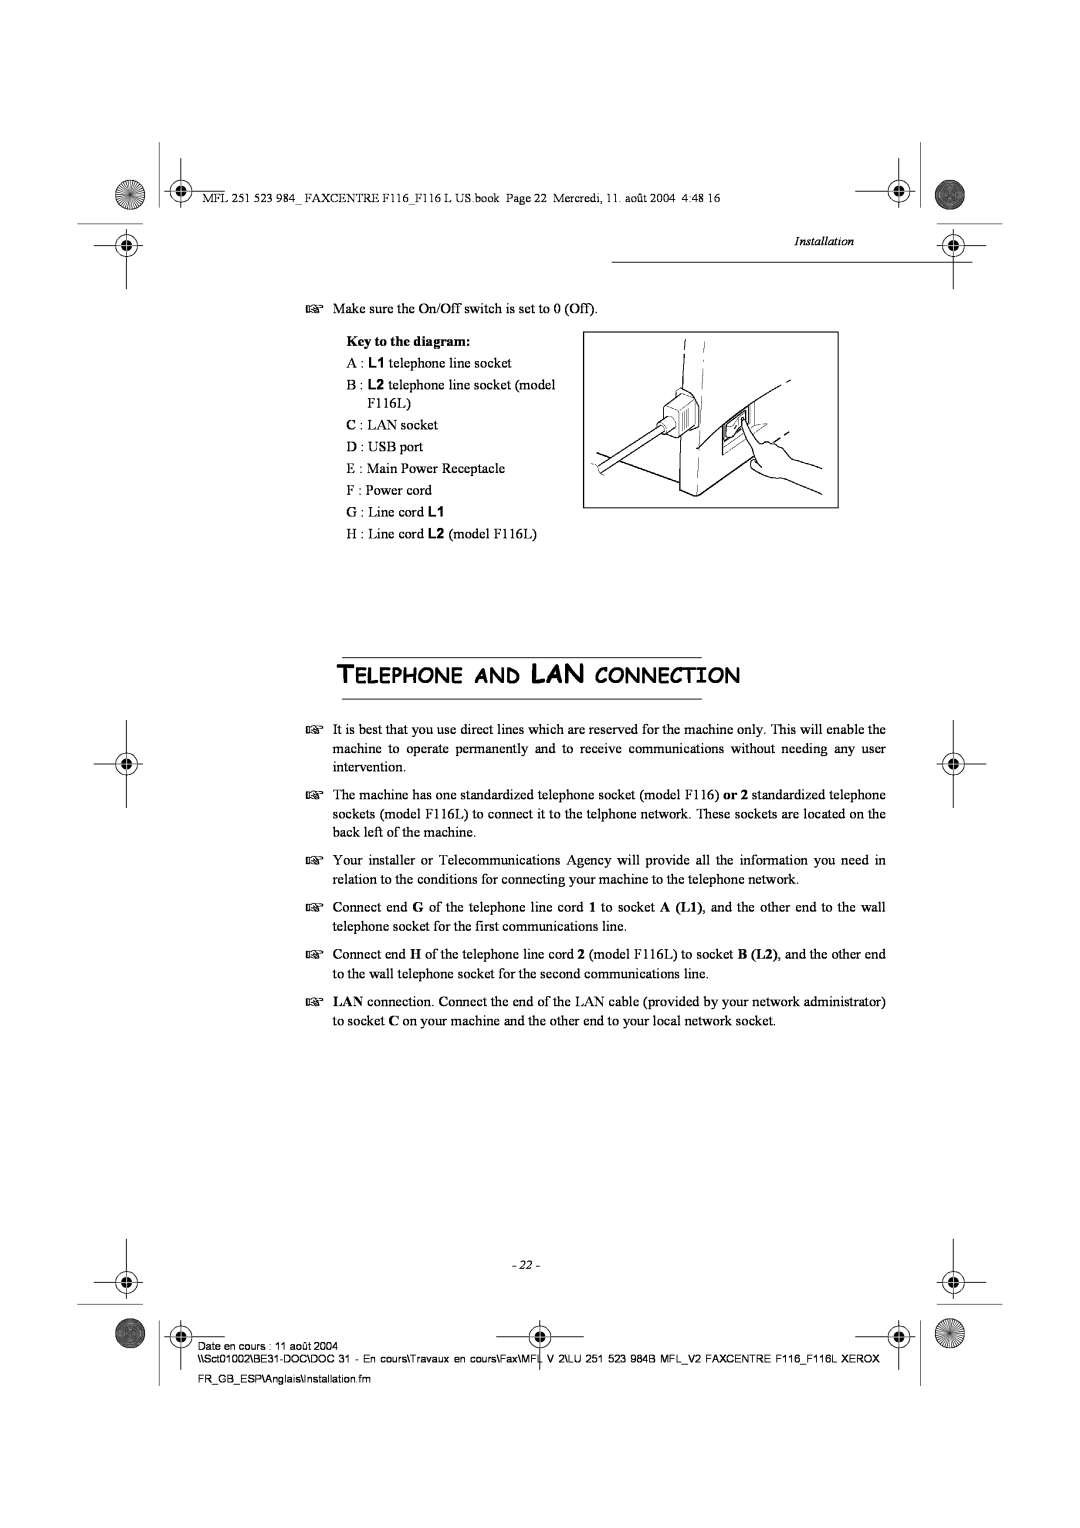 Xerox F116 user manual Telephone And Lan Connection, Key to the diagram 